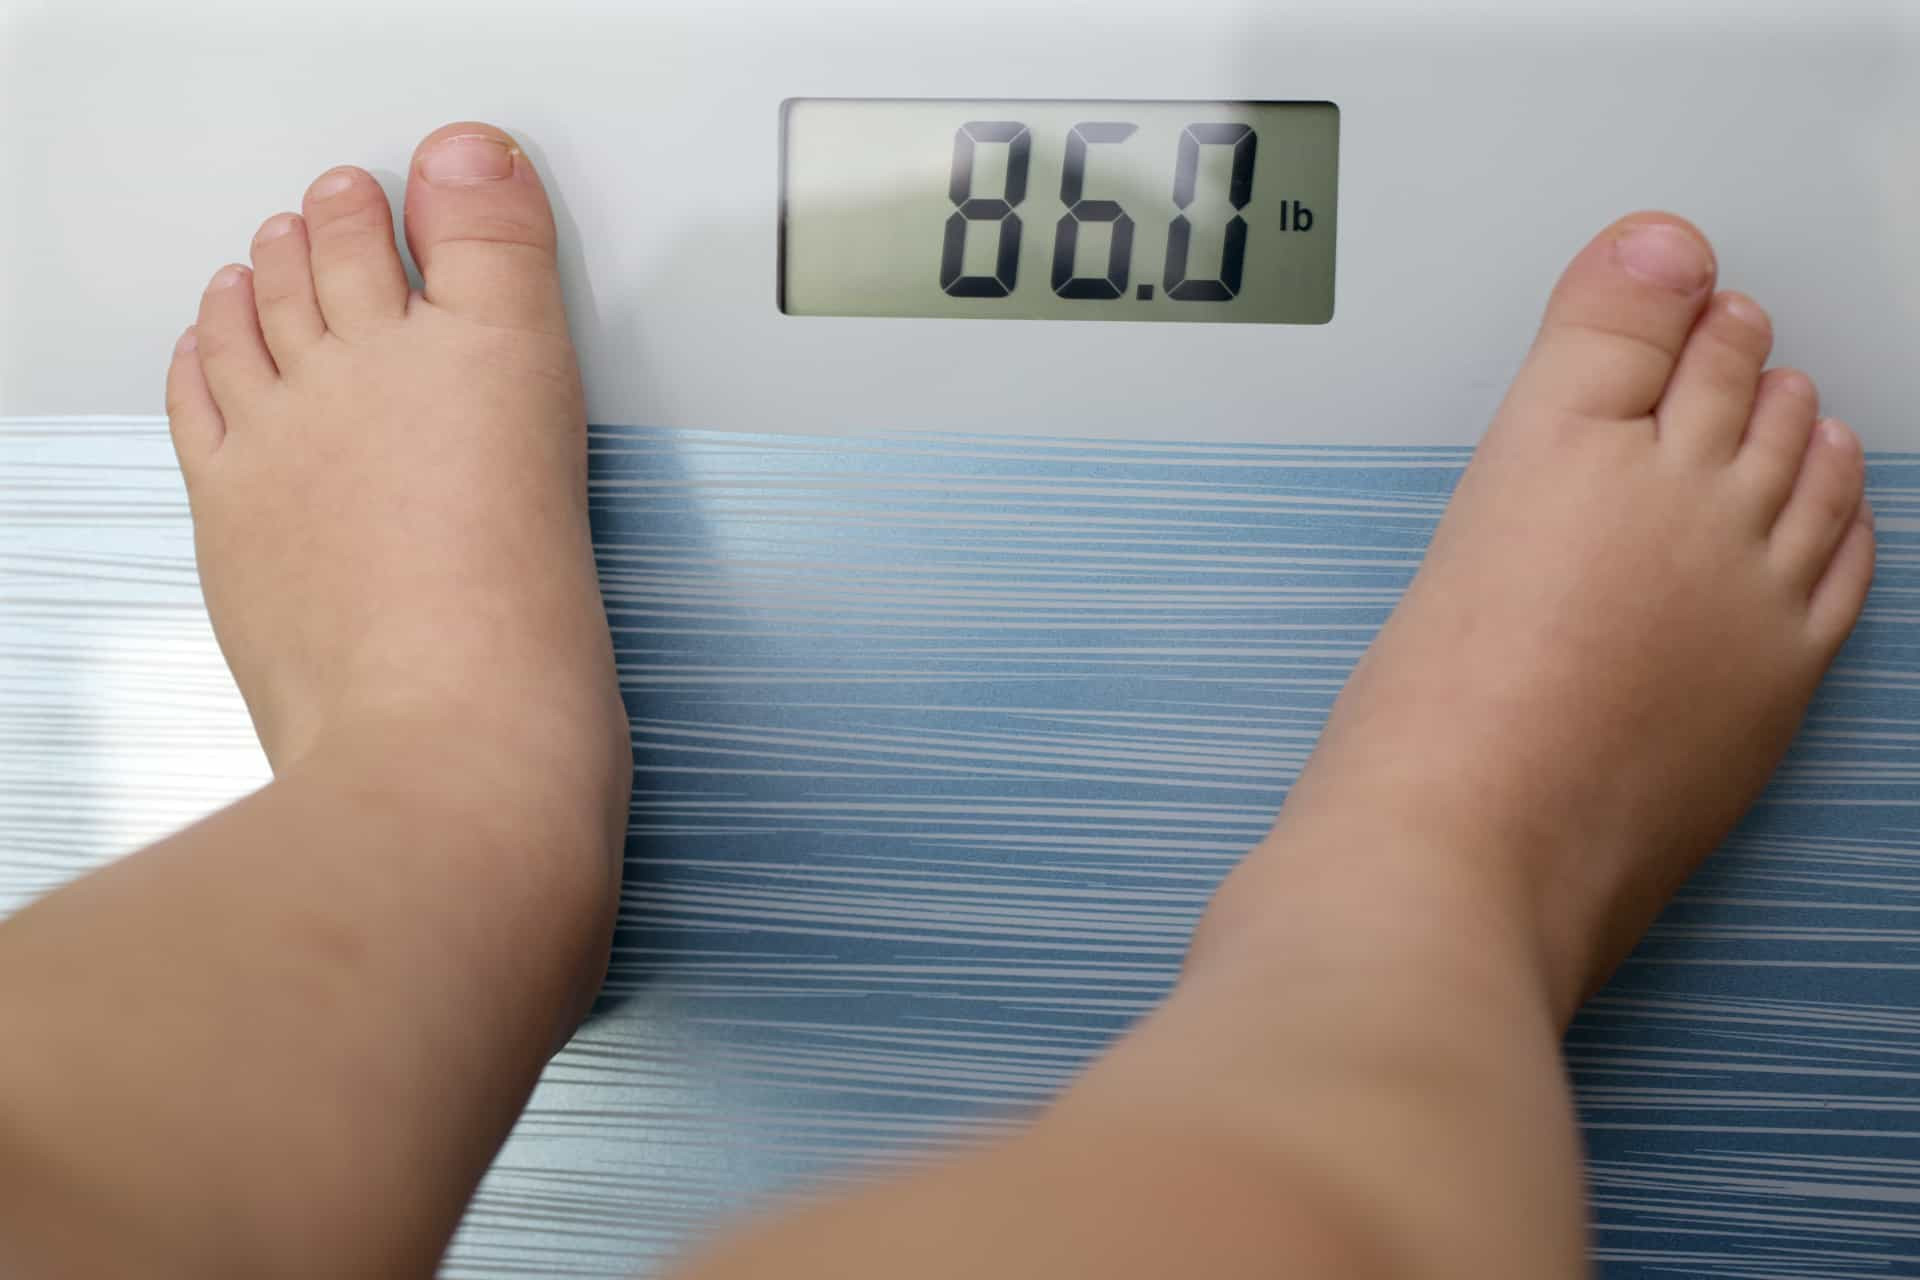 <p>The study showed that white American and Asian-American children had significantly lower obesity rates than other groups, such as African Americans and Hispanic Americans.</p><p><a href="https://www.msn.com/en-us/community/channel/vid-7xx8mnucu55yw63we9va2gwr7uihbxwc68fxqp25x6tg4ftibpra?cvid=94631541bc0f4f89bfd59158d696ad7e">Follow us and access great exclusive content every day</a></p>